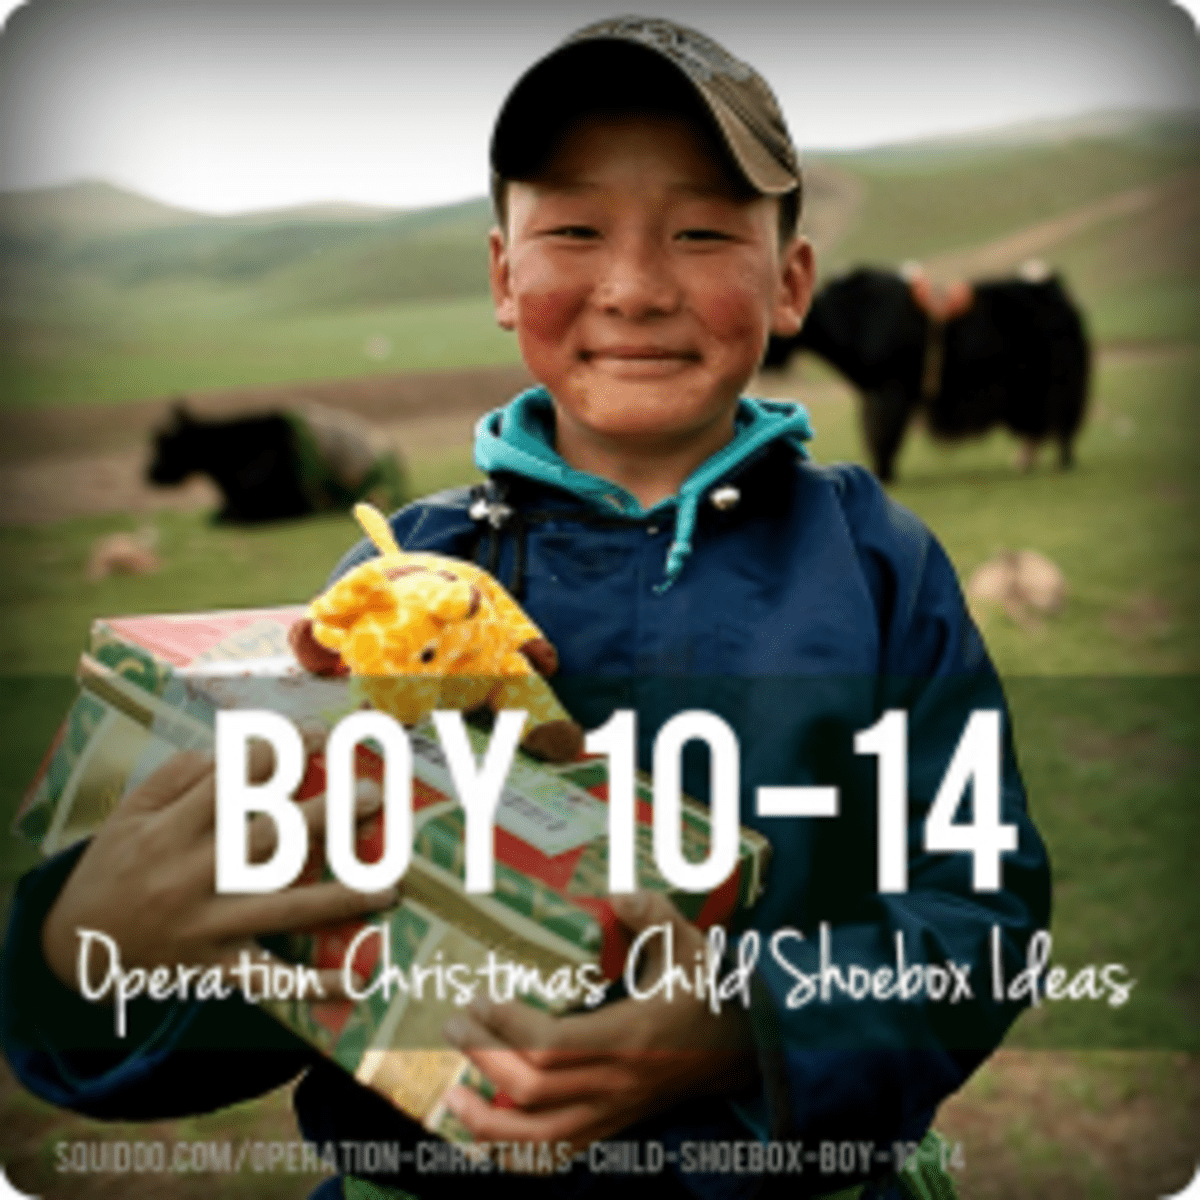 Operation Christmas Child: Life-Changing Shoebox Ideas for a 10-14